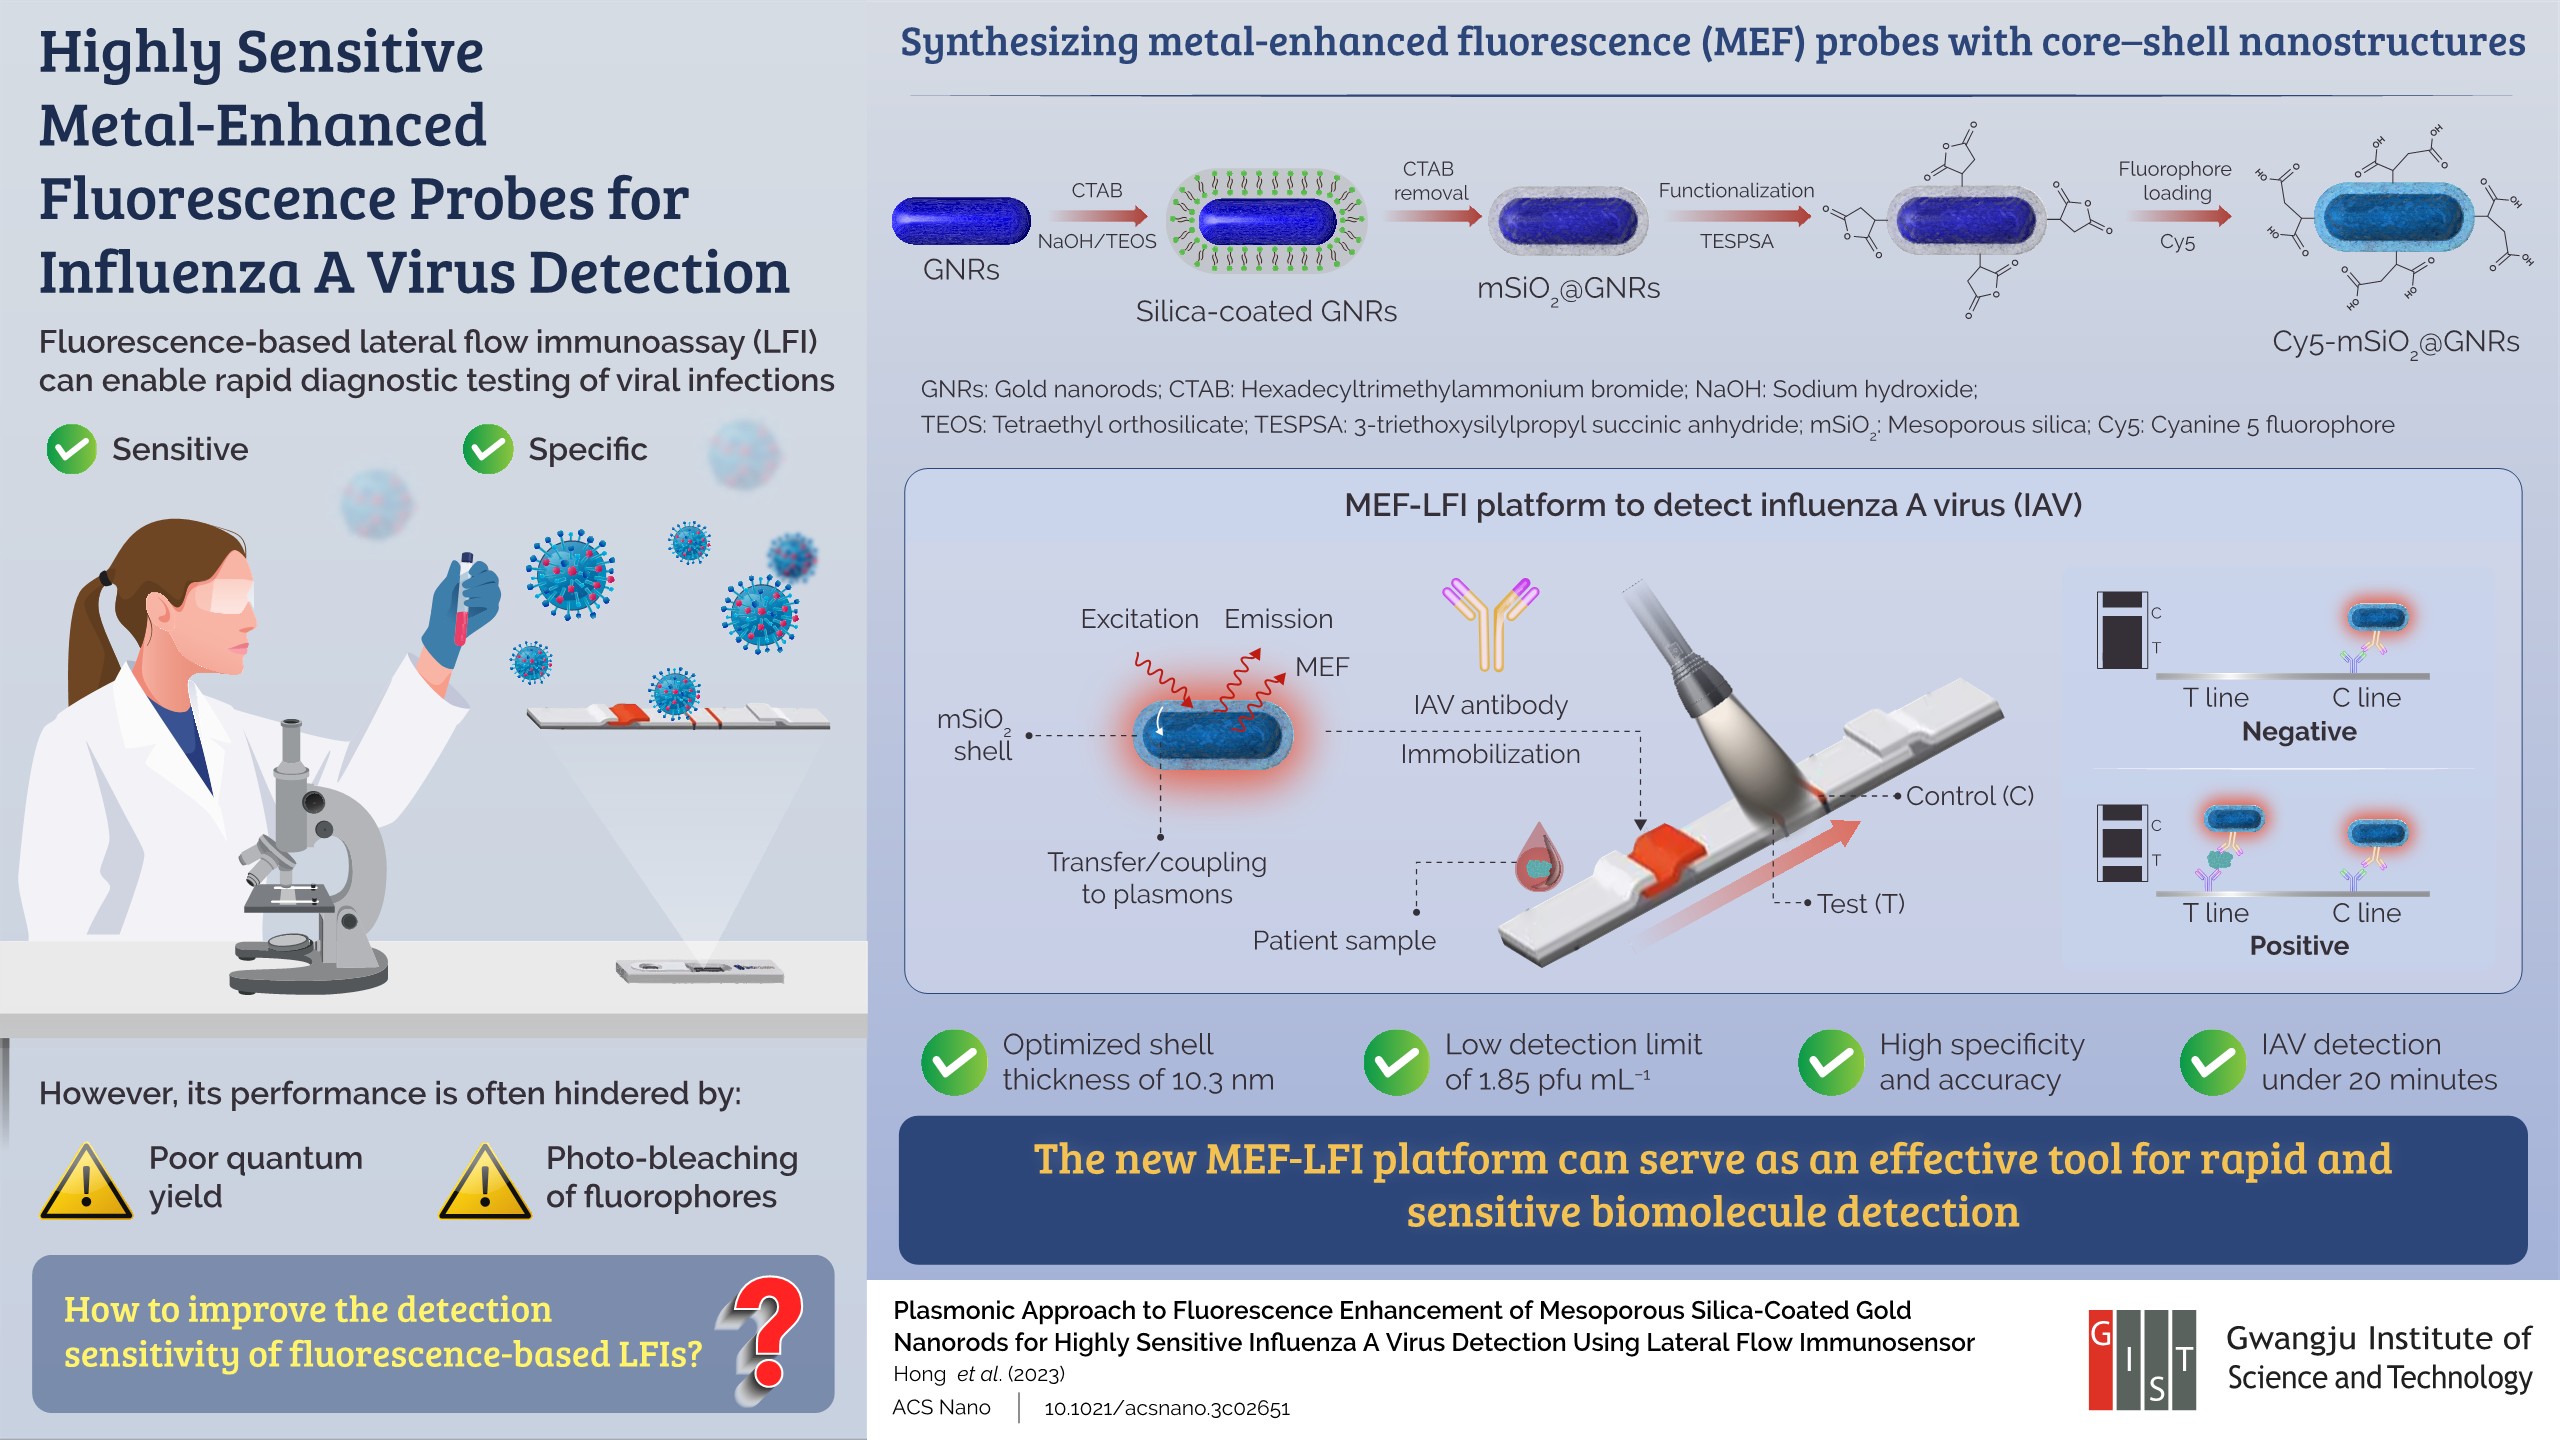 Gwangju Institute of Science and Technology Researchers Develop Metal-Enhanced Fluorescence Probes for Influenza A Virus Detection 이미지